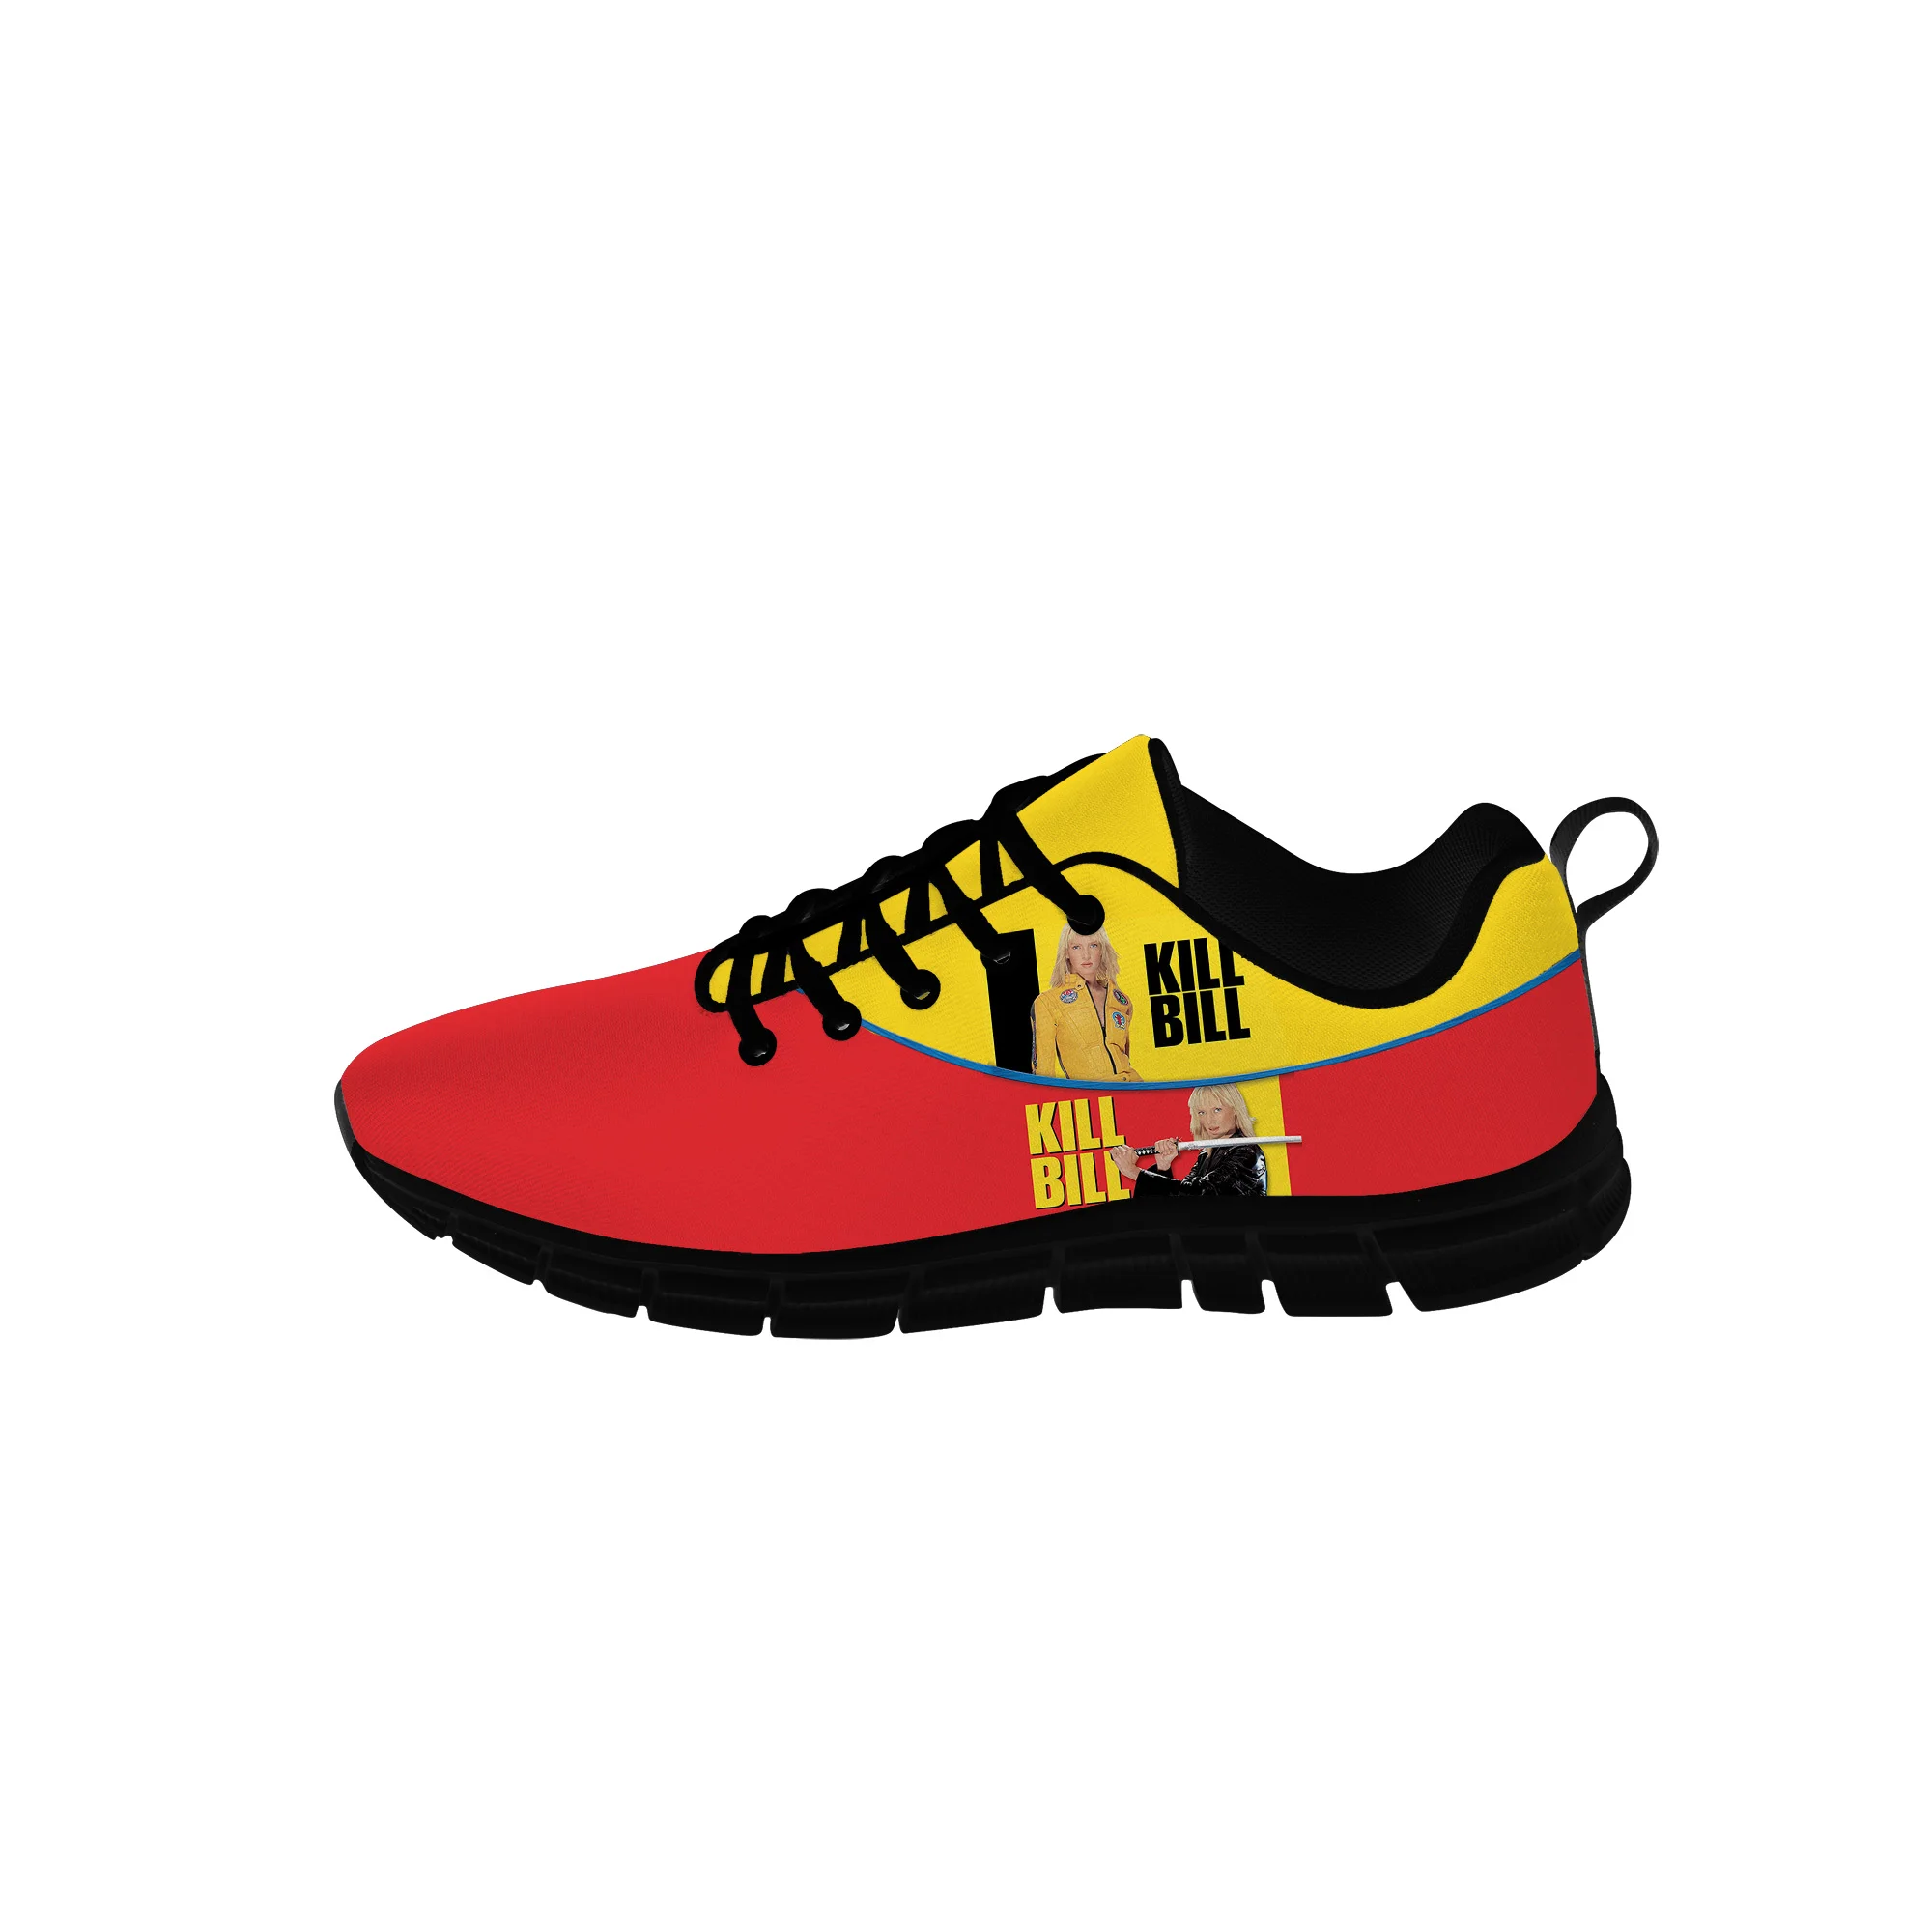 Movie Kill Bill Low Top Sneakers Mens Womens Teenager Casual Shoes Canvas Running Shoes 3D Printed Breathable Lightweight Shoe 0